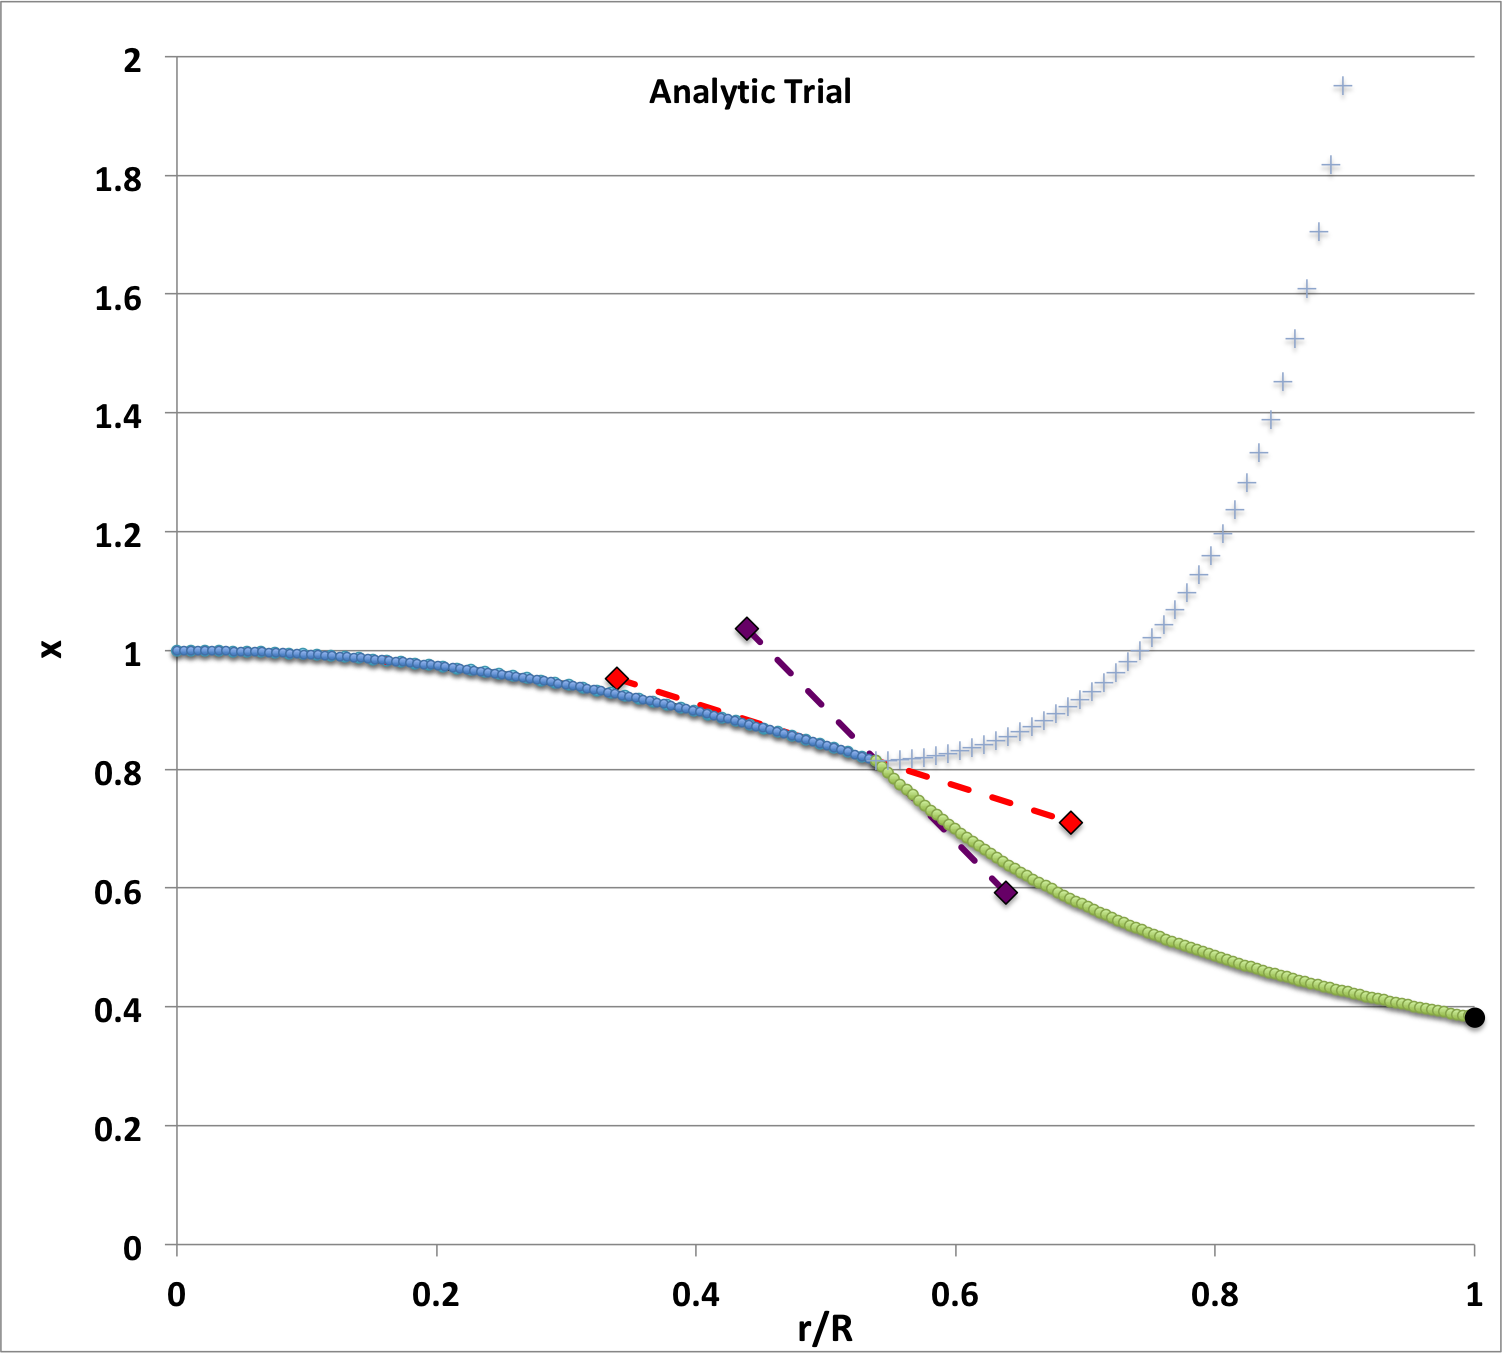 First Analytic Trial